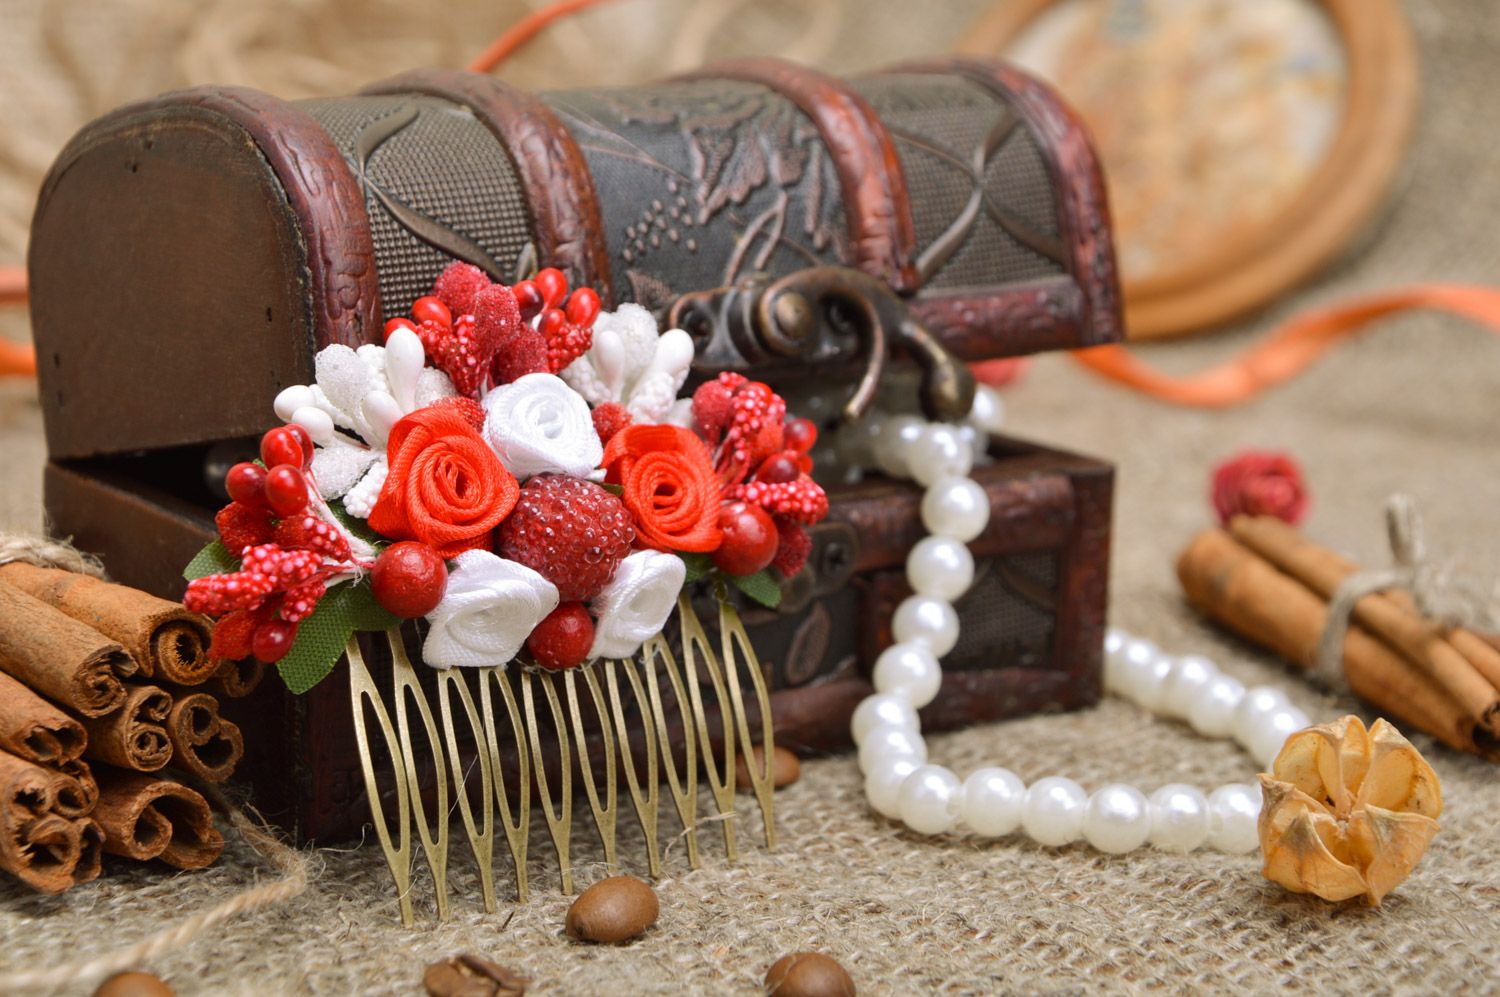 Handmade decorative red and white metal hair comb with ribbons and berries photo 1